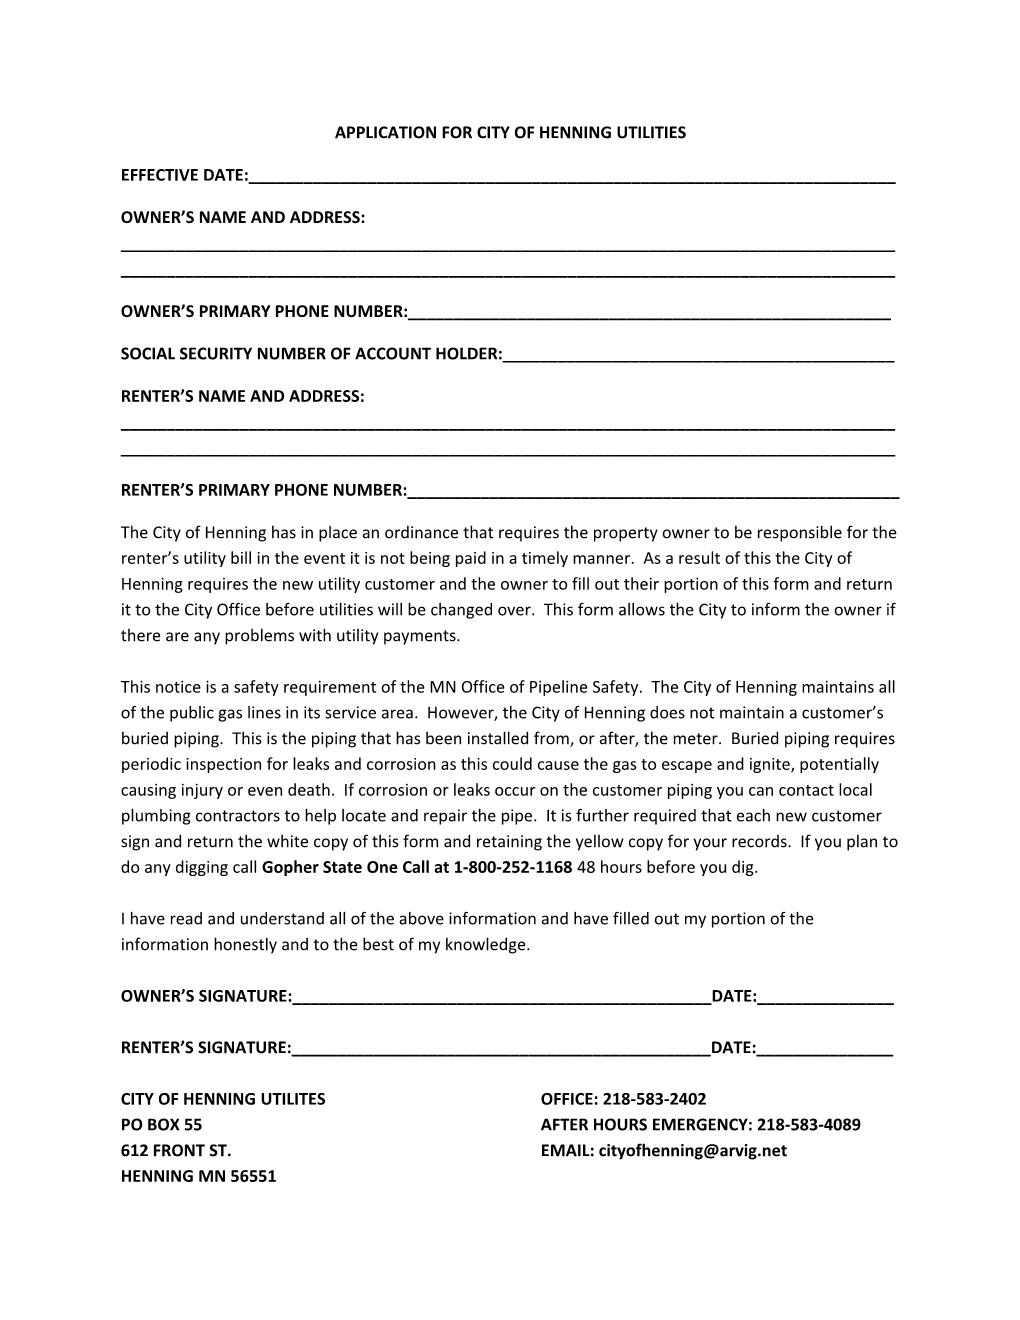 Application for City of Henning Utilities